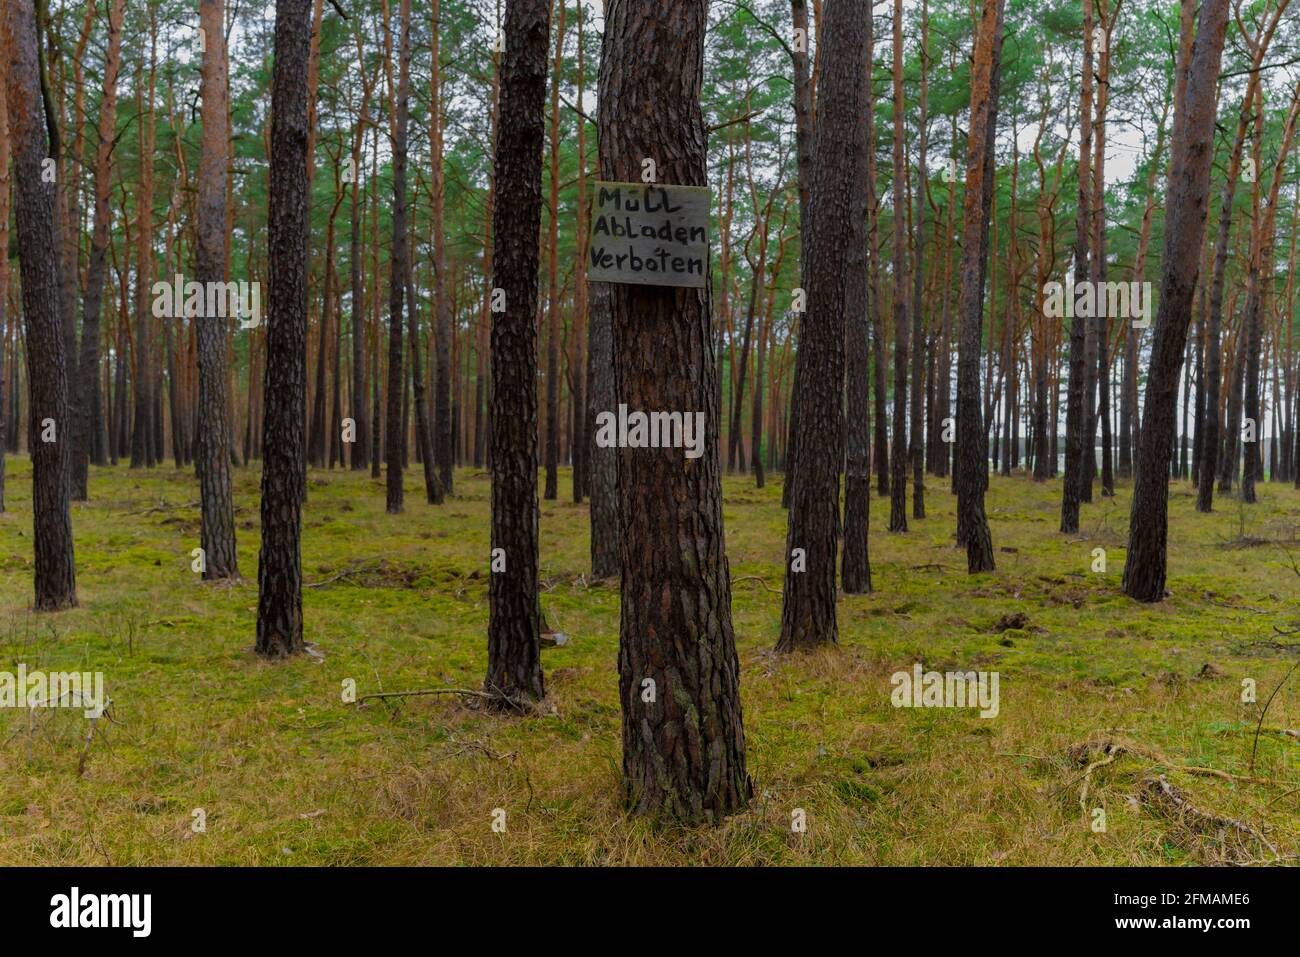 Pine forest in spring, on the tree a sign with German inscription, garbage unloading prohibited Stock Photo